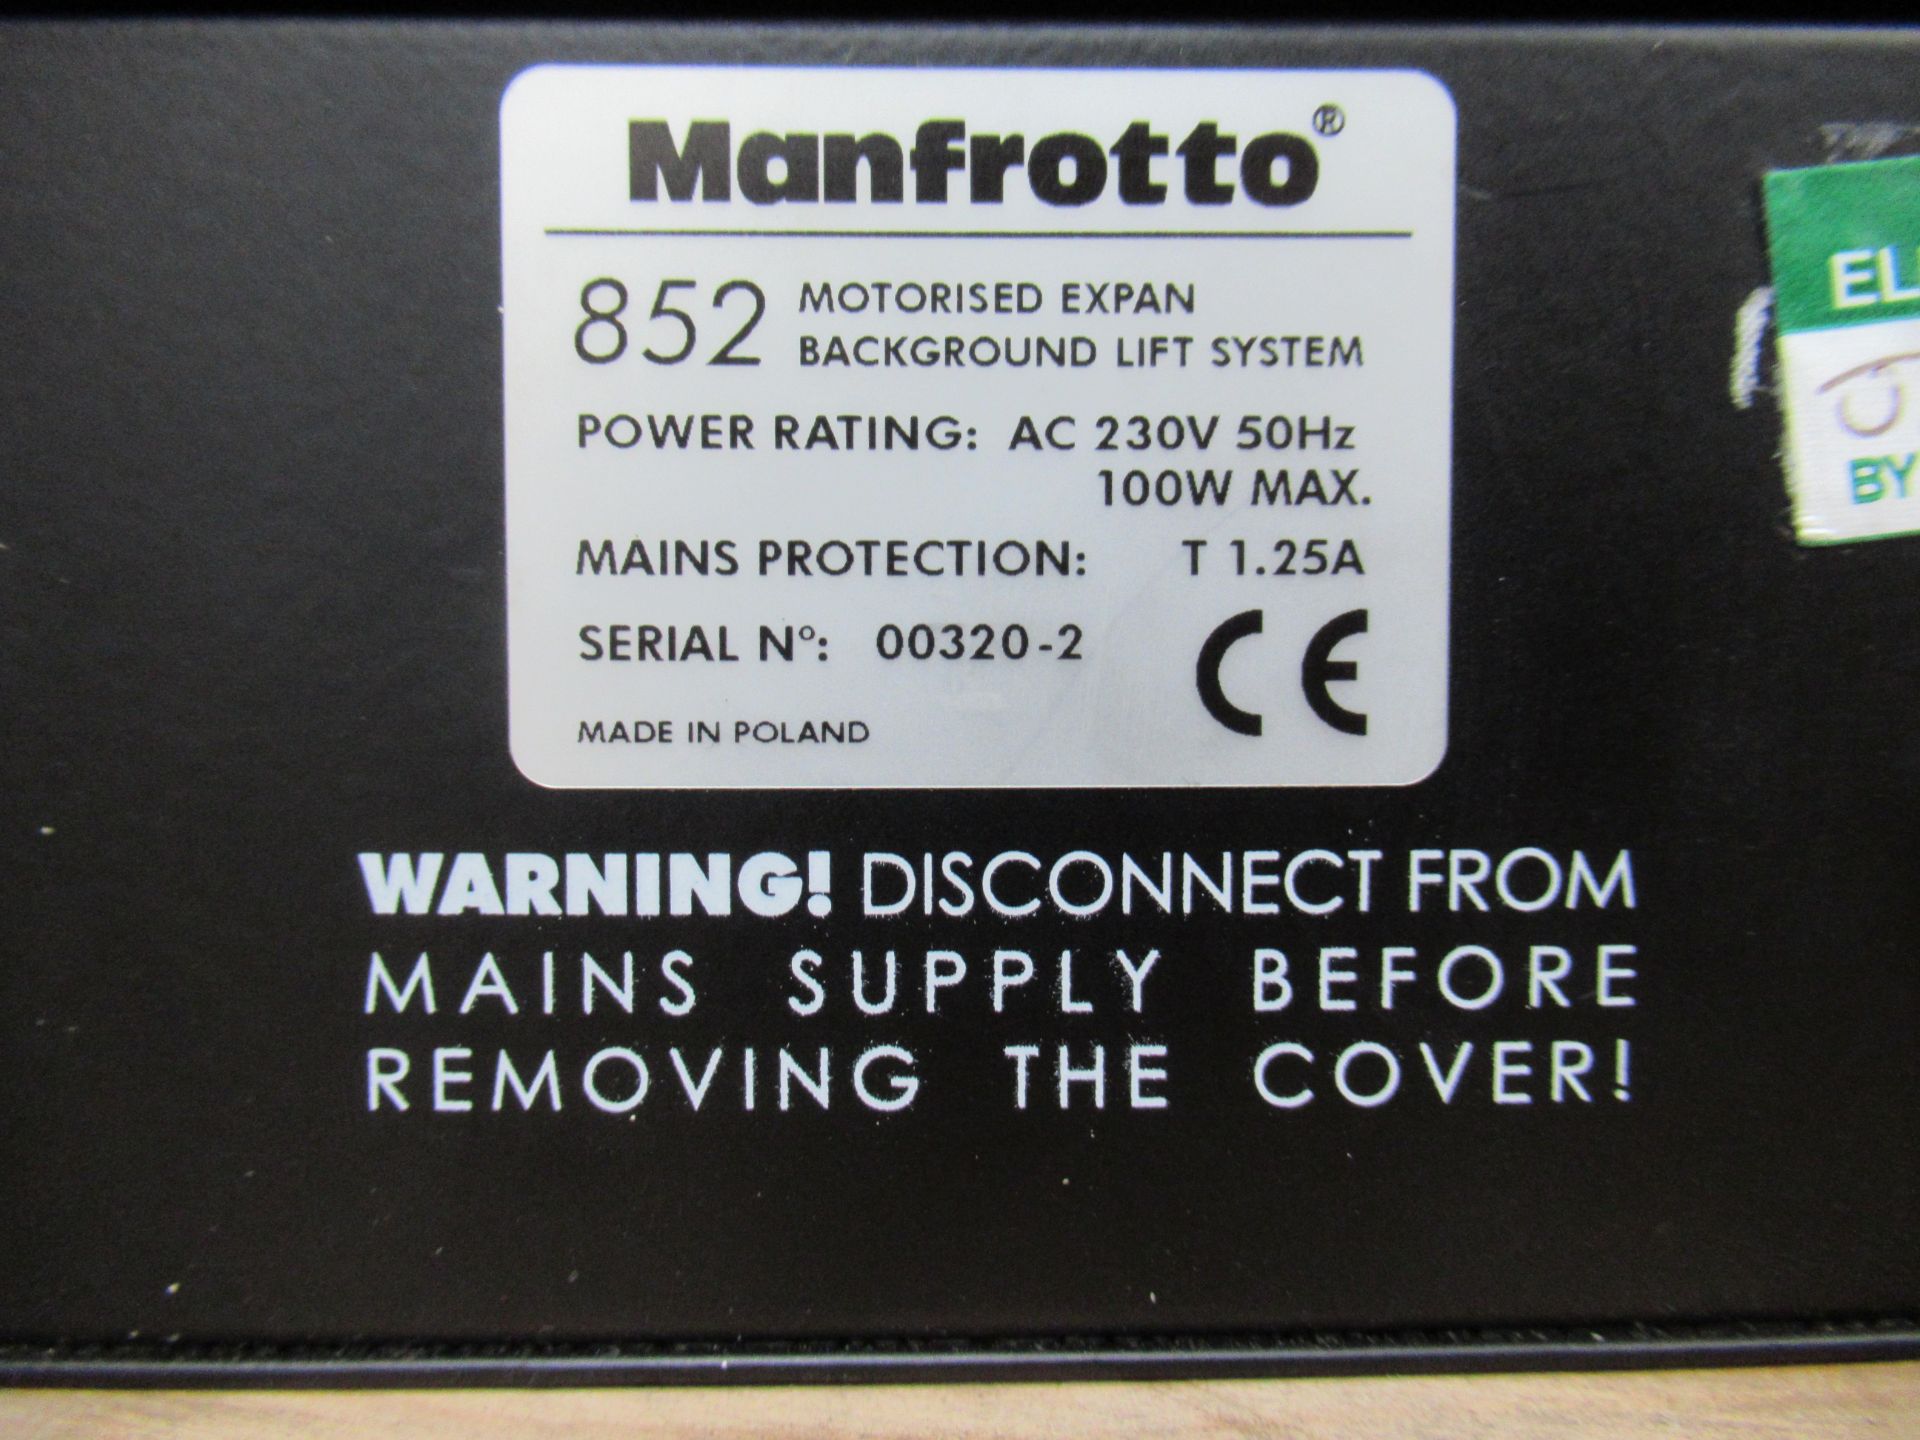 2 x Manfrotto 852 Motorised Expan Background Lift Systems, comes with controller but no cables - Image 2 of 2